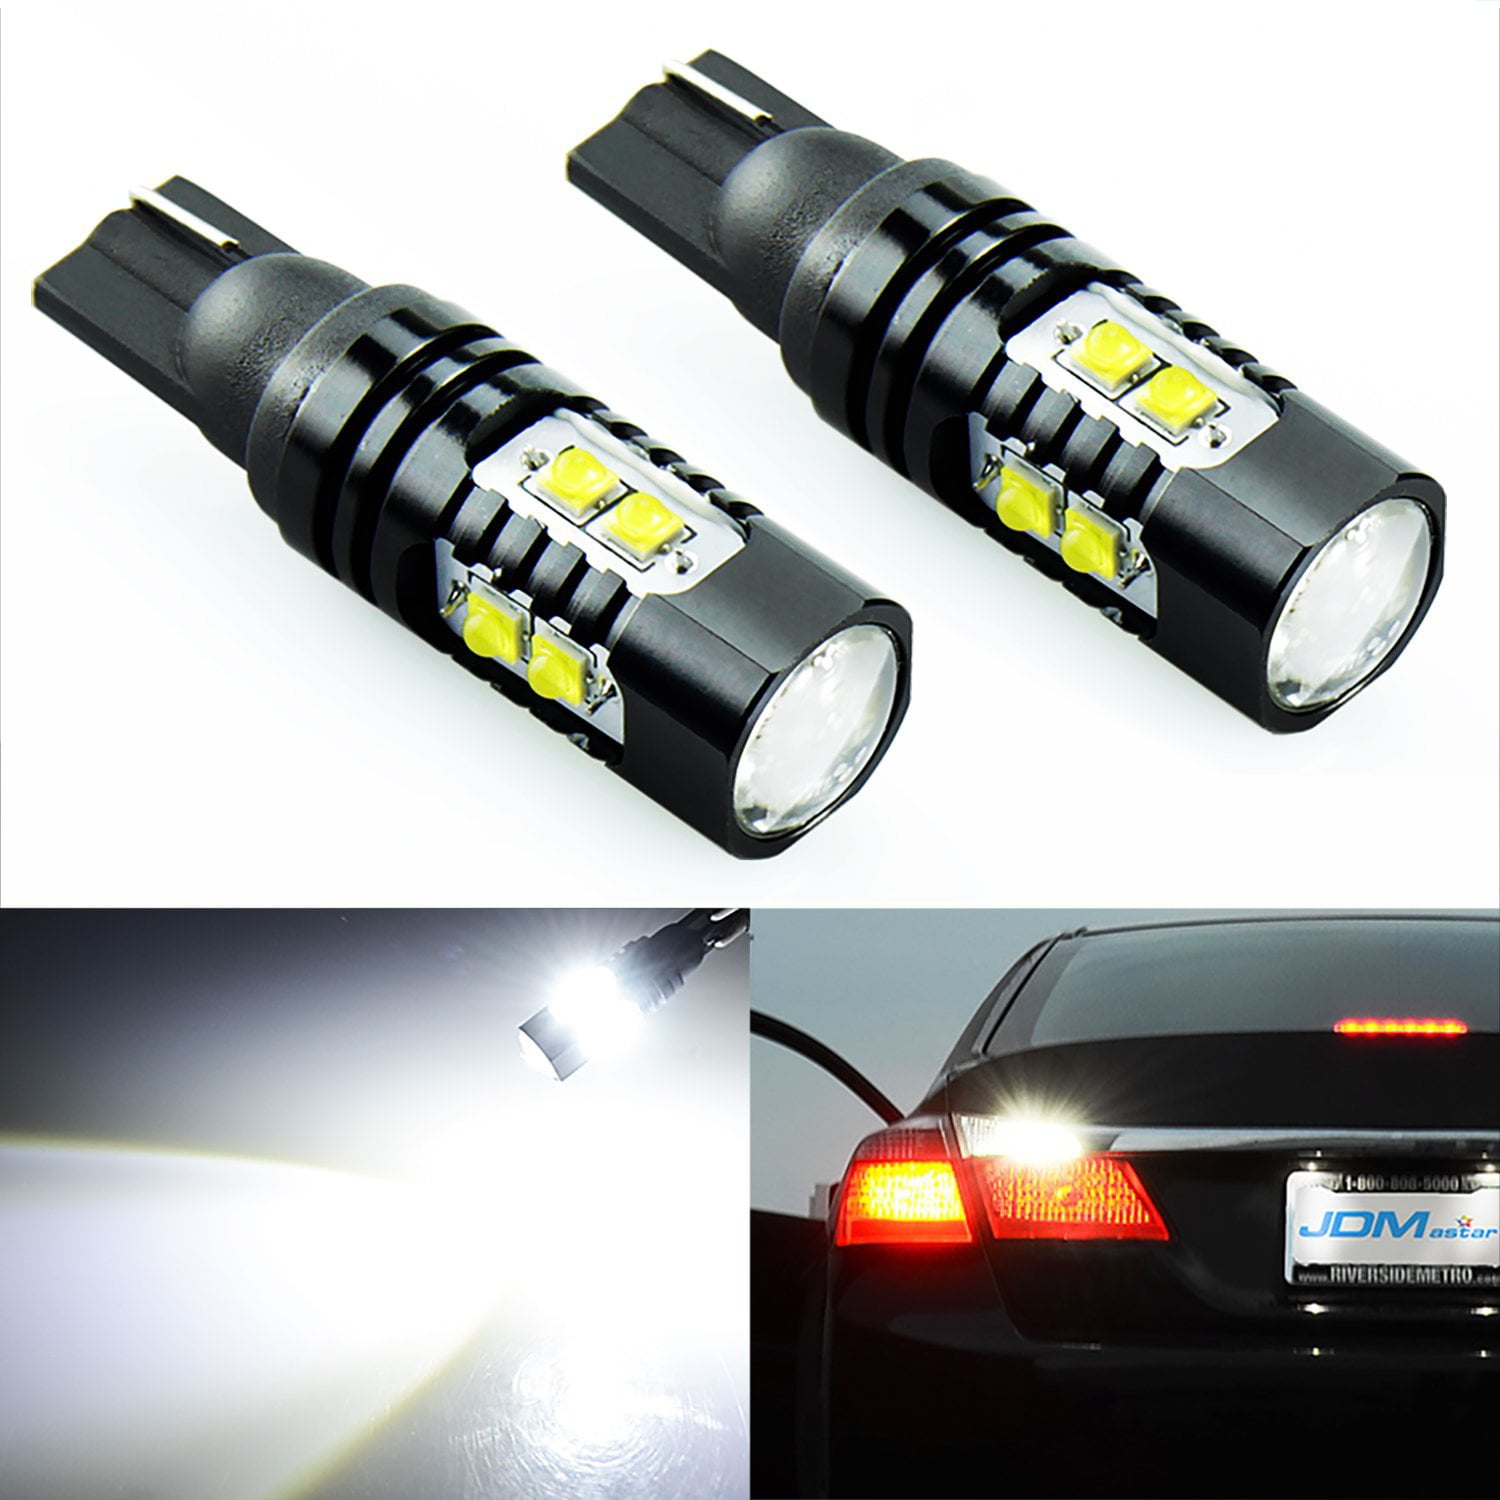 Xenon White JDM ASTAR Extremely Bright Max 50W High Power 1156 7506 LED Light Bulbs for Back Up Reverse Lights 